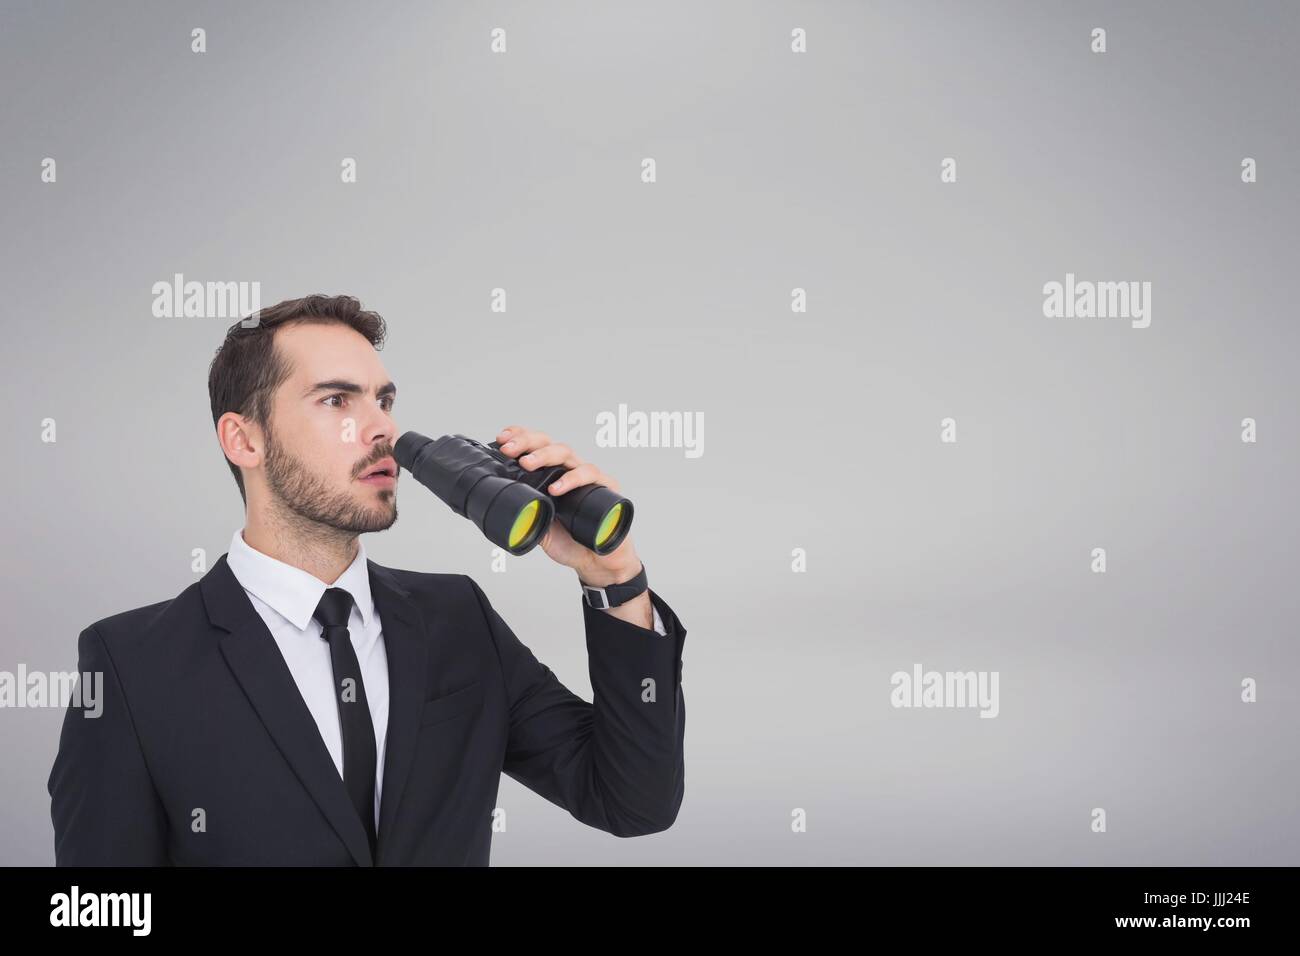 Confused man with binoculars against white copy space background Stock Photo